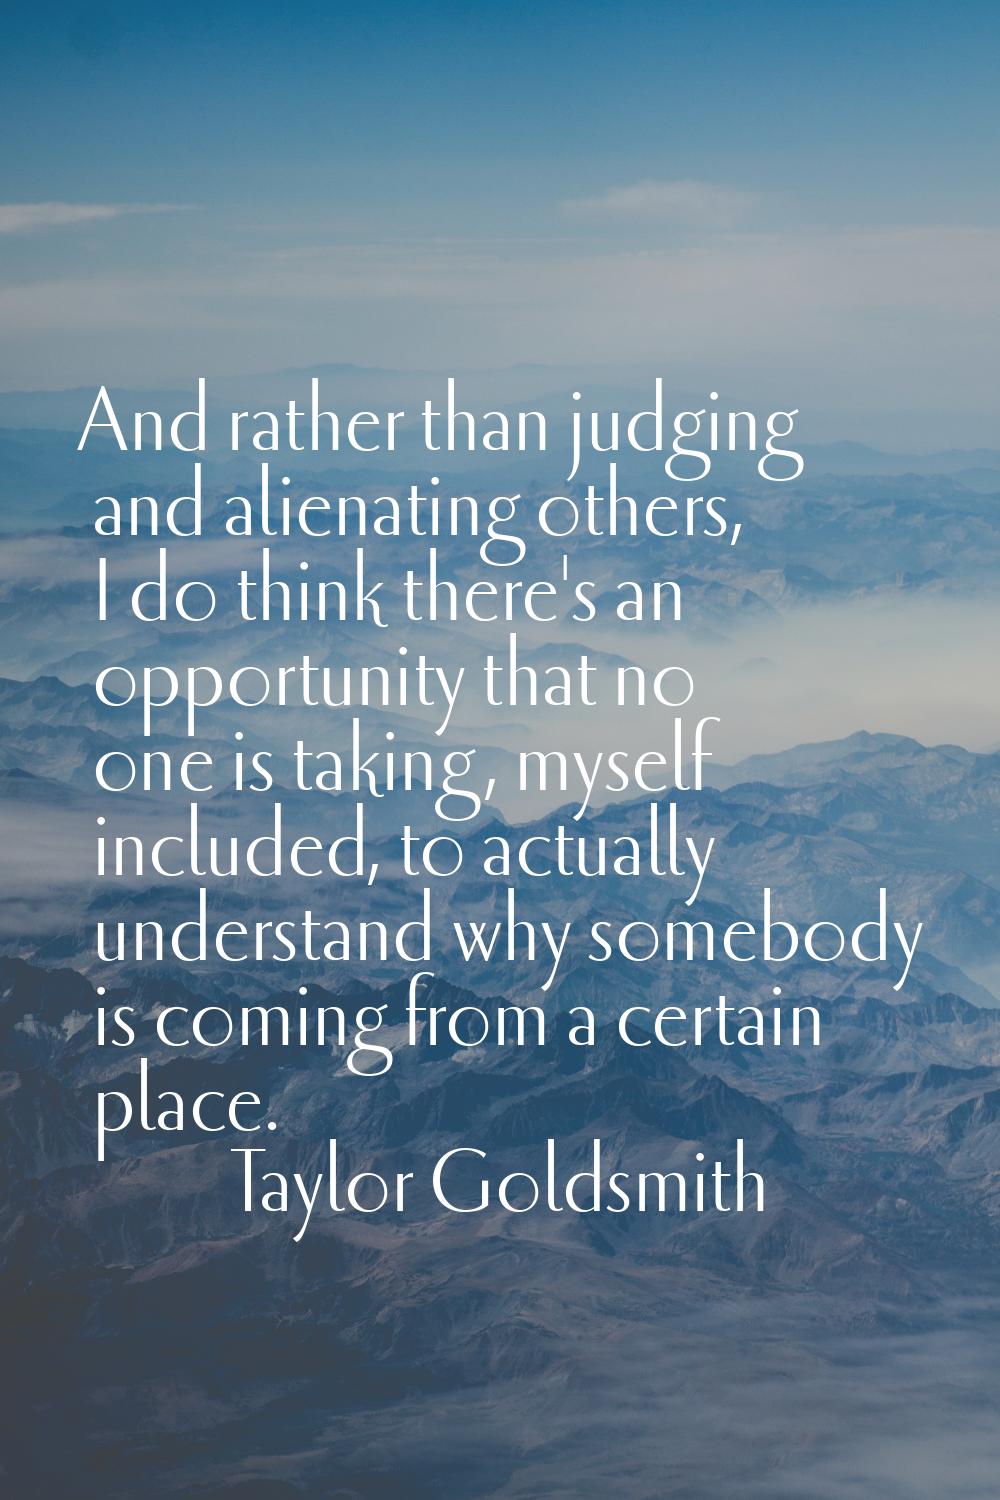 And rather than judging and alienating others, I do think there's an opportunity that no one is tak